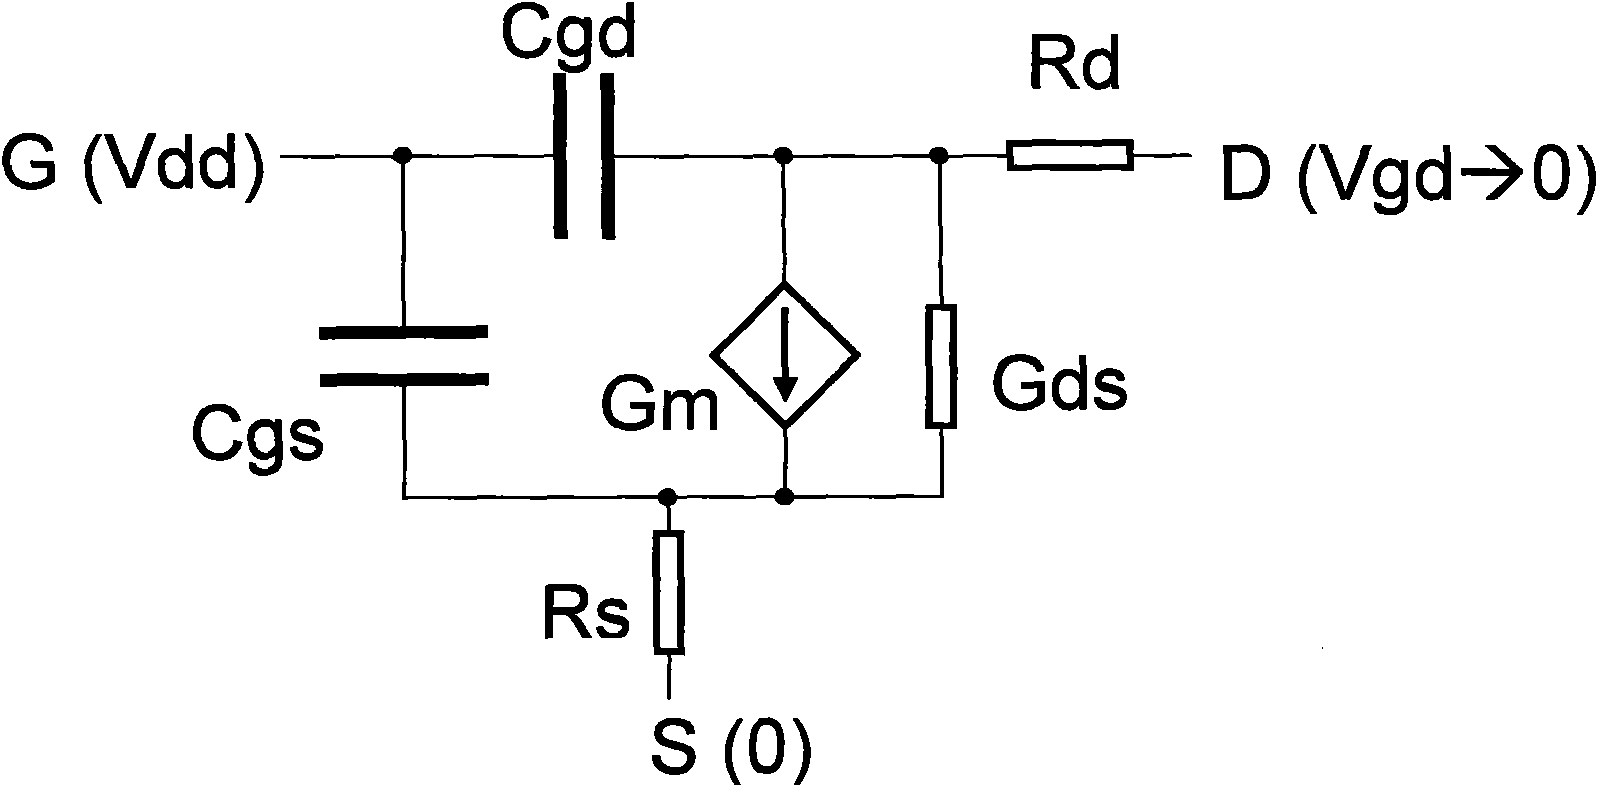 MOS (Metal Oxide Semiconductor) field effect transistor